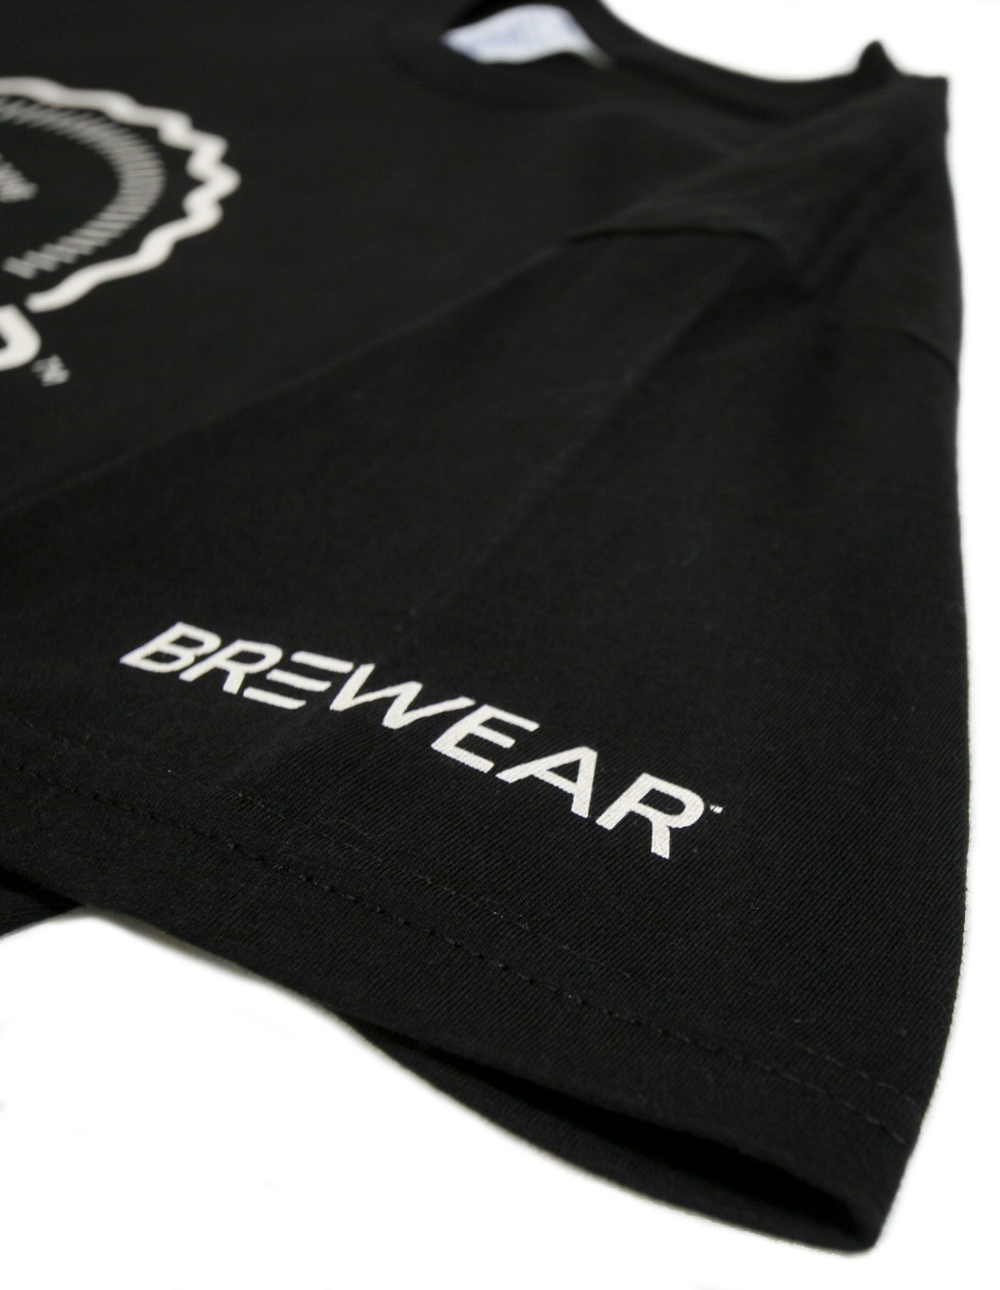 Art and Ink Brewear Branded Black T-shirt